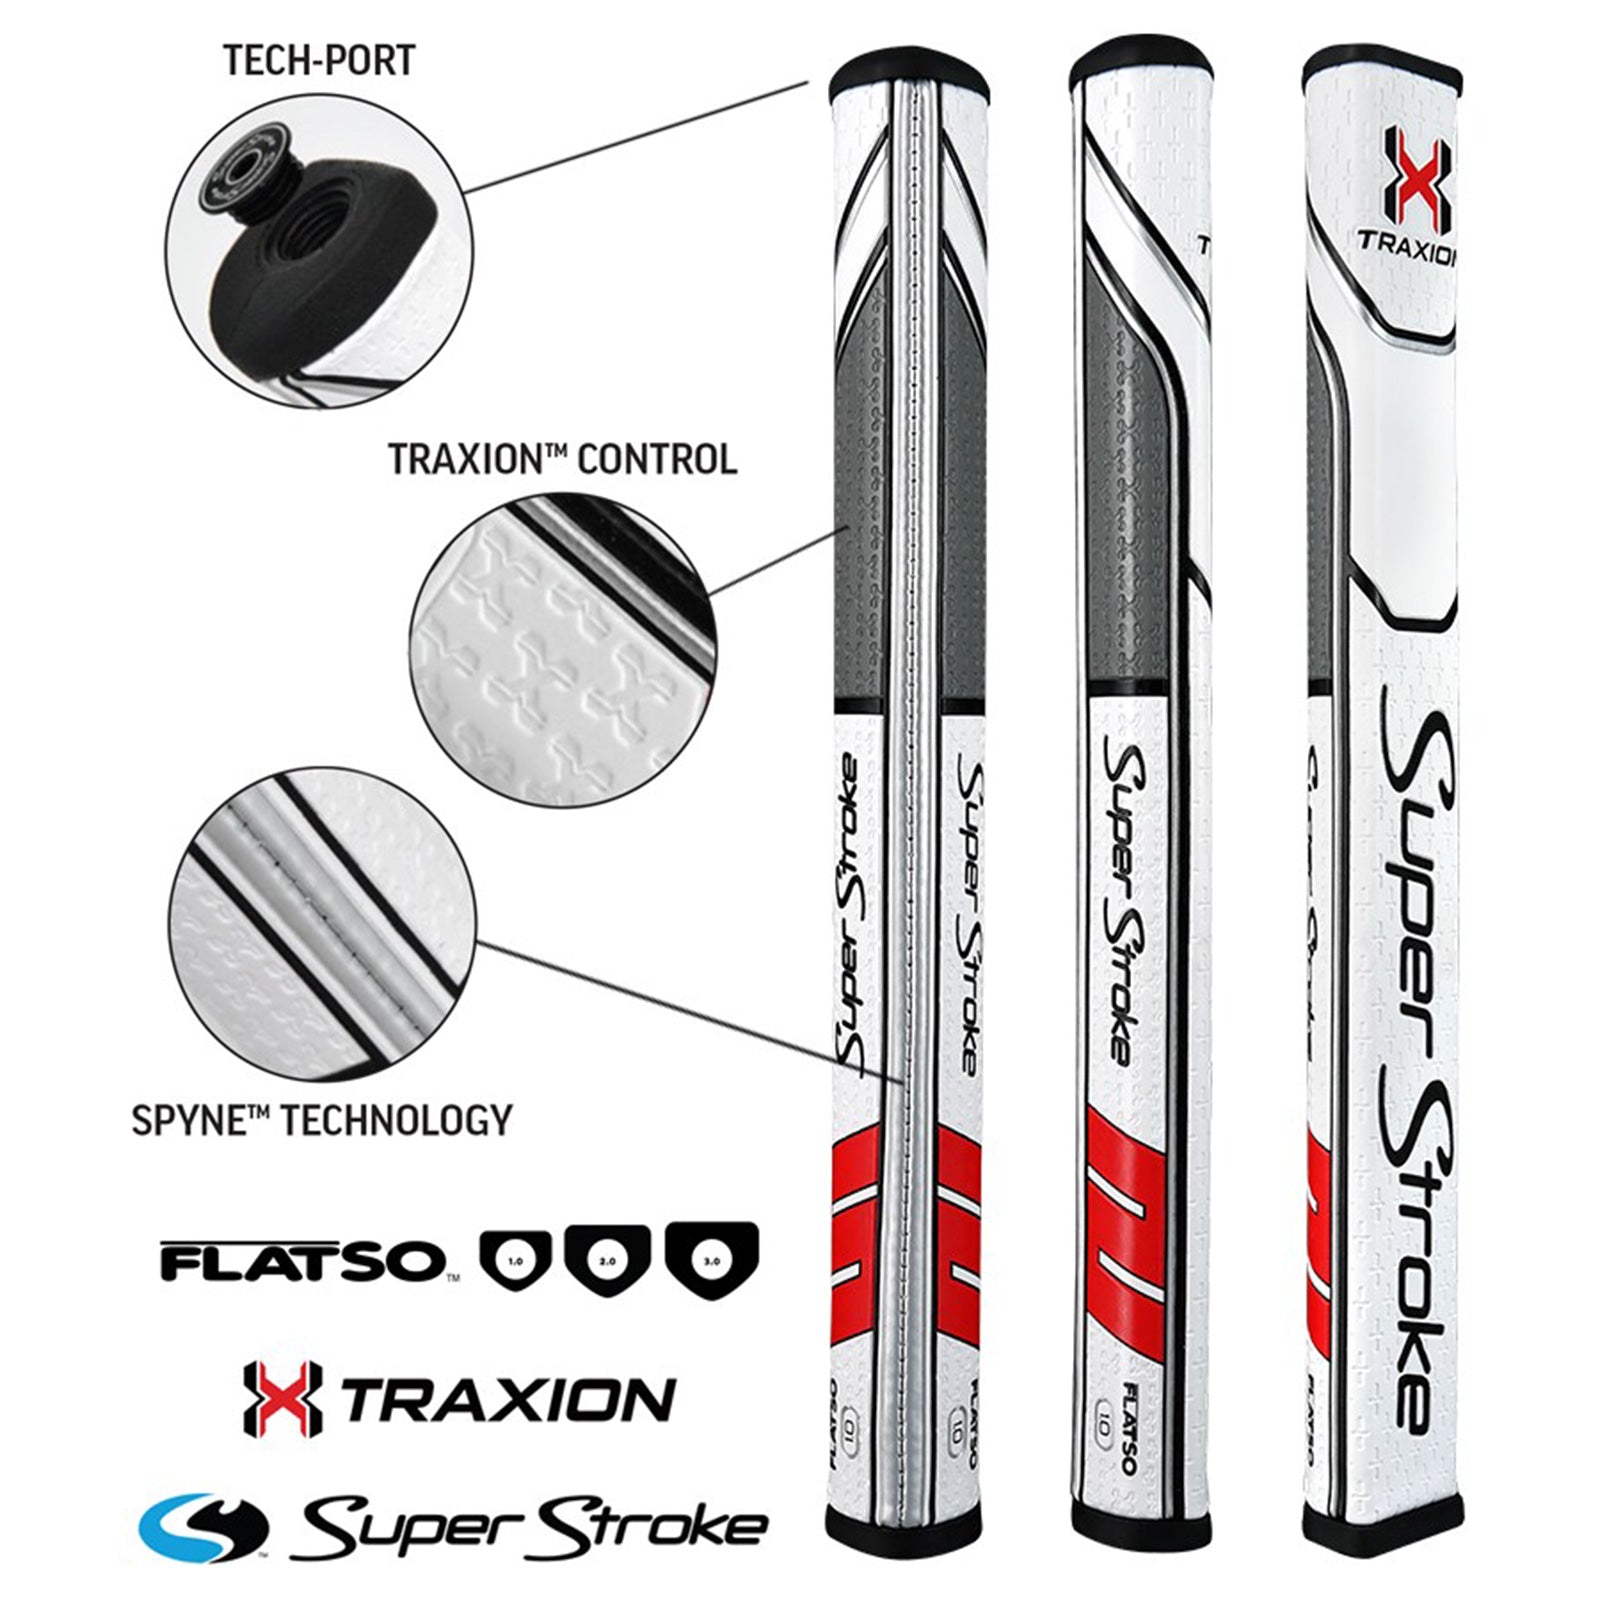 SuperStroke Traxion Flatso Putter Grips